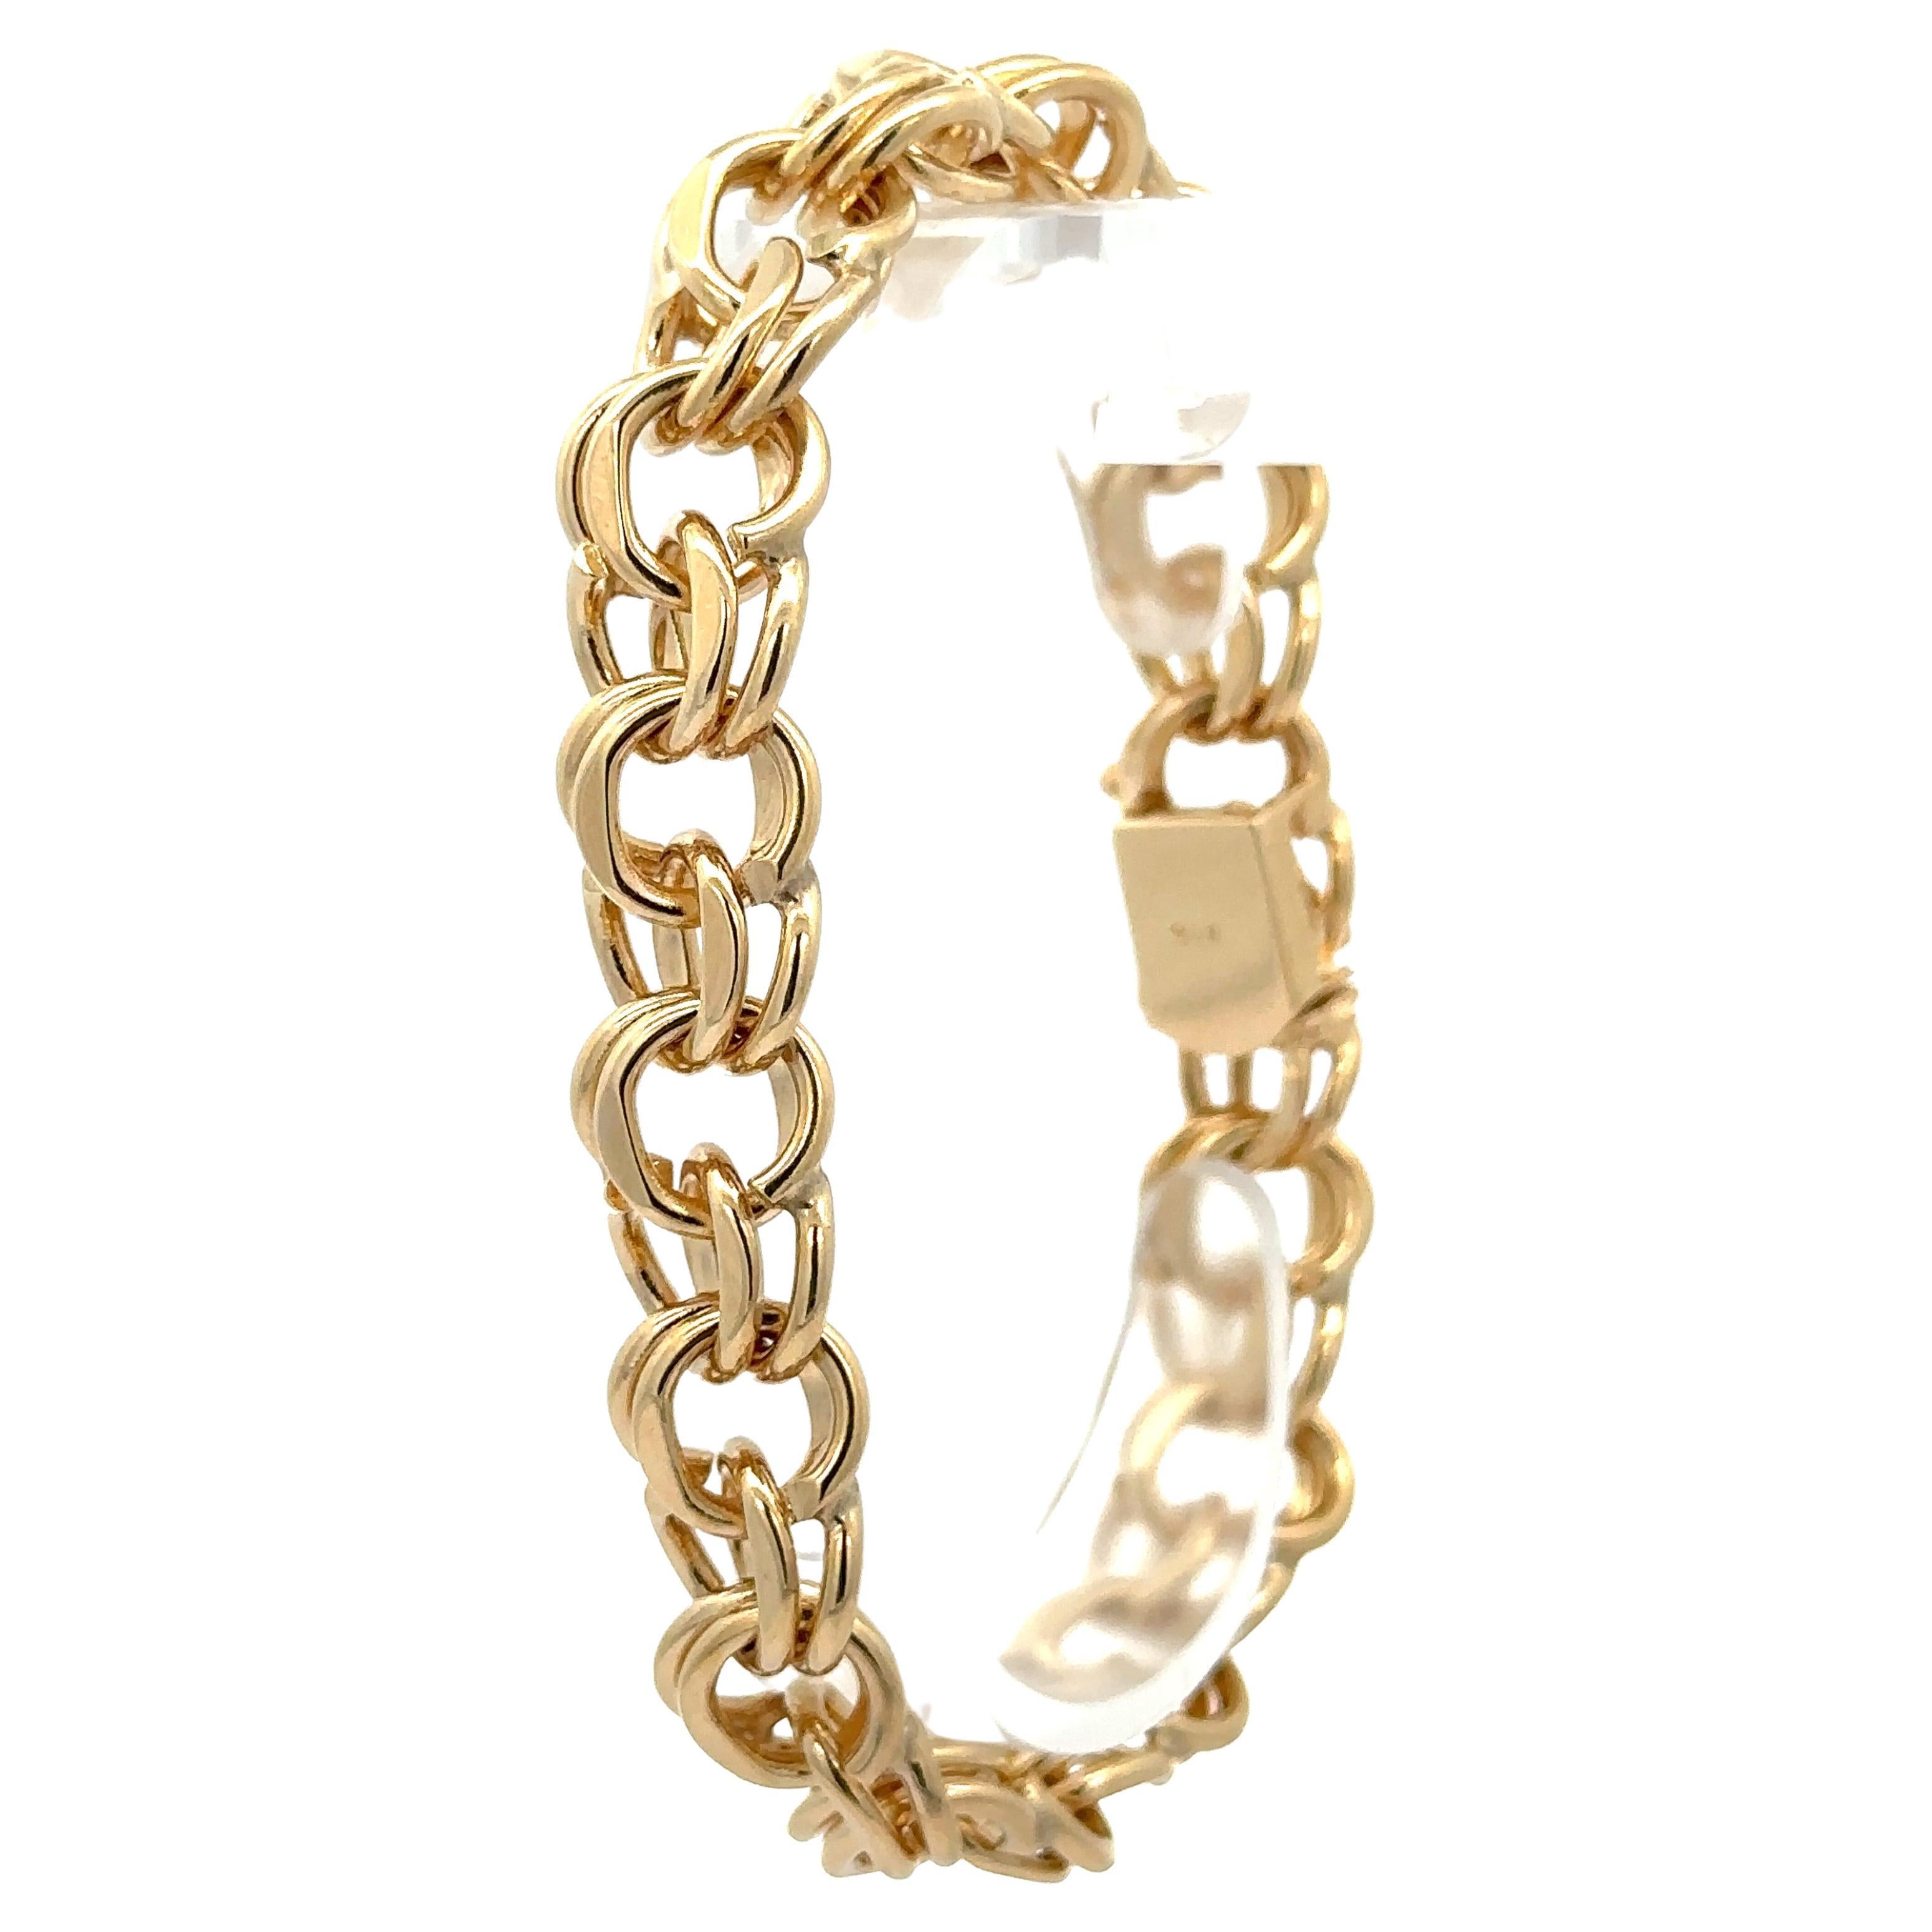 Vintage Solid 14K Yellow Gold 7.5" Polished Dual Curb Link Charm Chain Bracelet For Sale